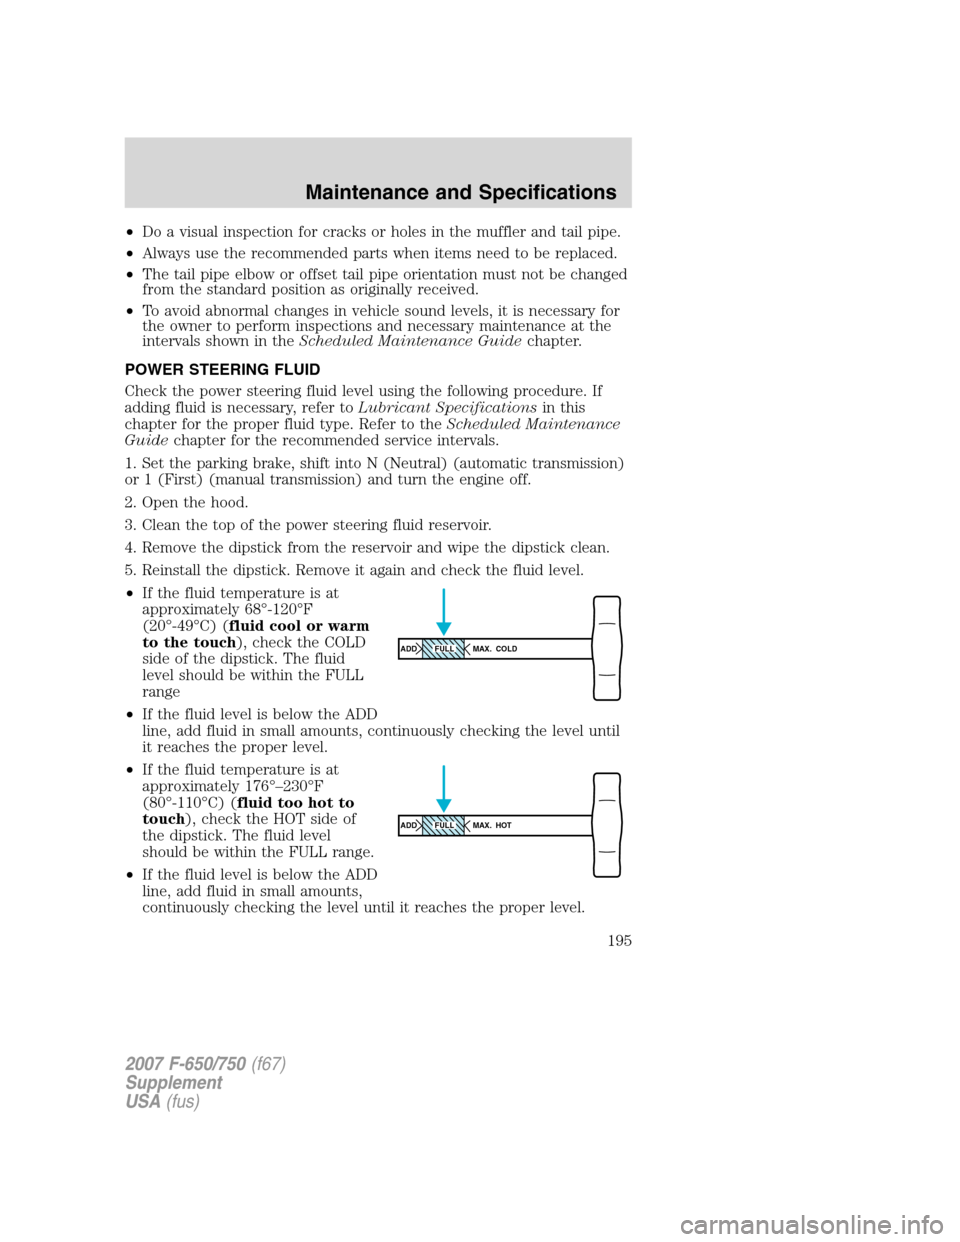 FORD F650 2007 11.G Service Manual •Do a visual inspection for cracks or holes in the muffler and tail pipe.
•Always use the recommended parts when items need to be replaced.
•The tail pipe elbow or offset tail pipe orientation m